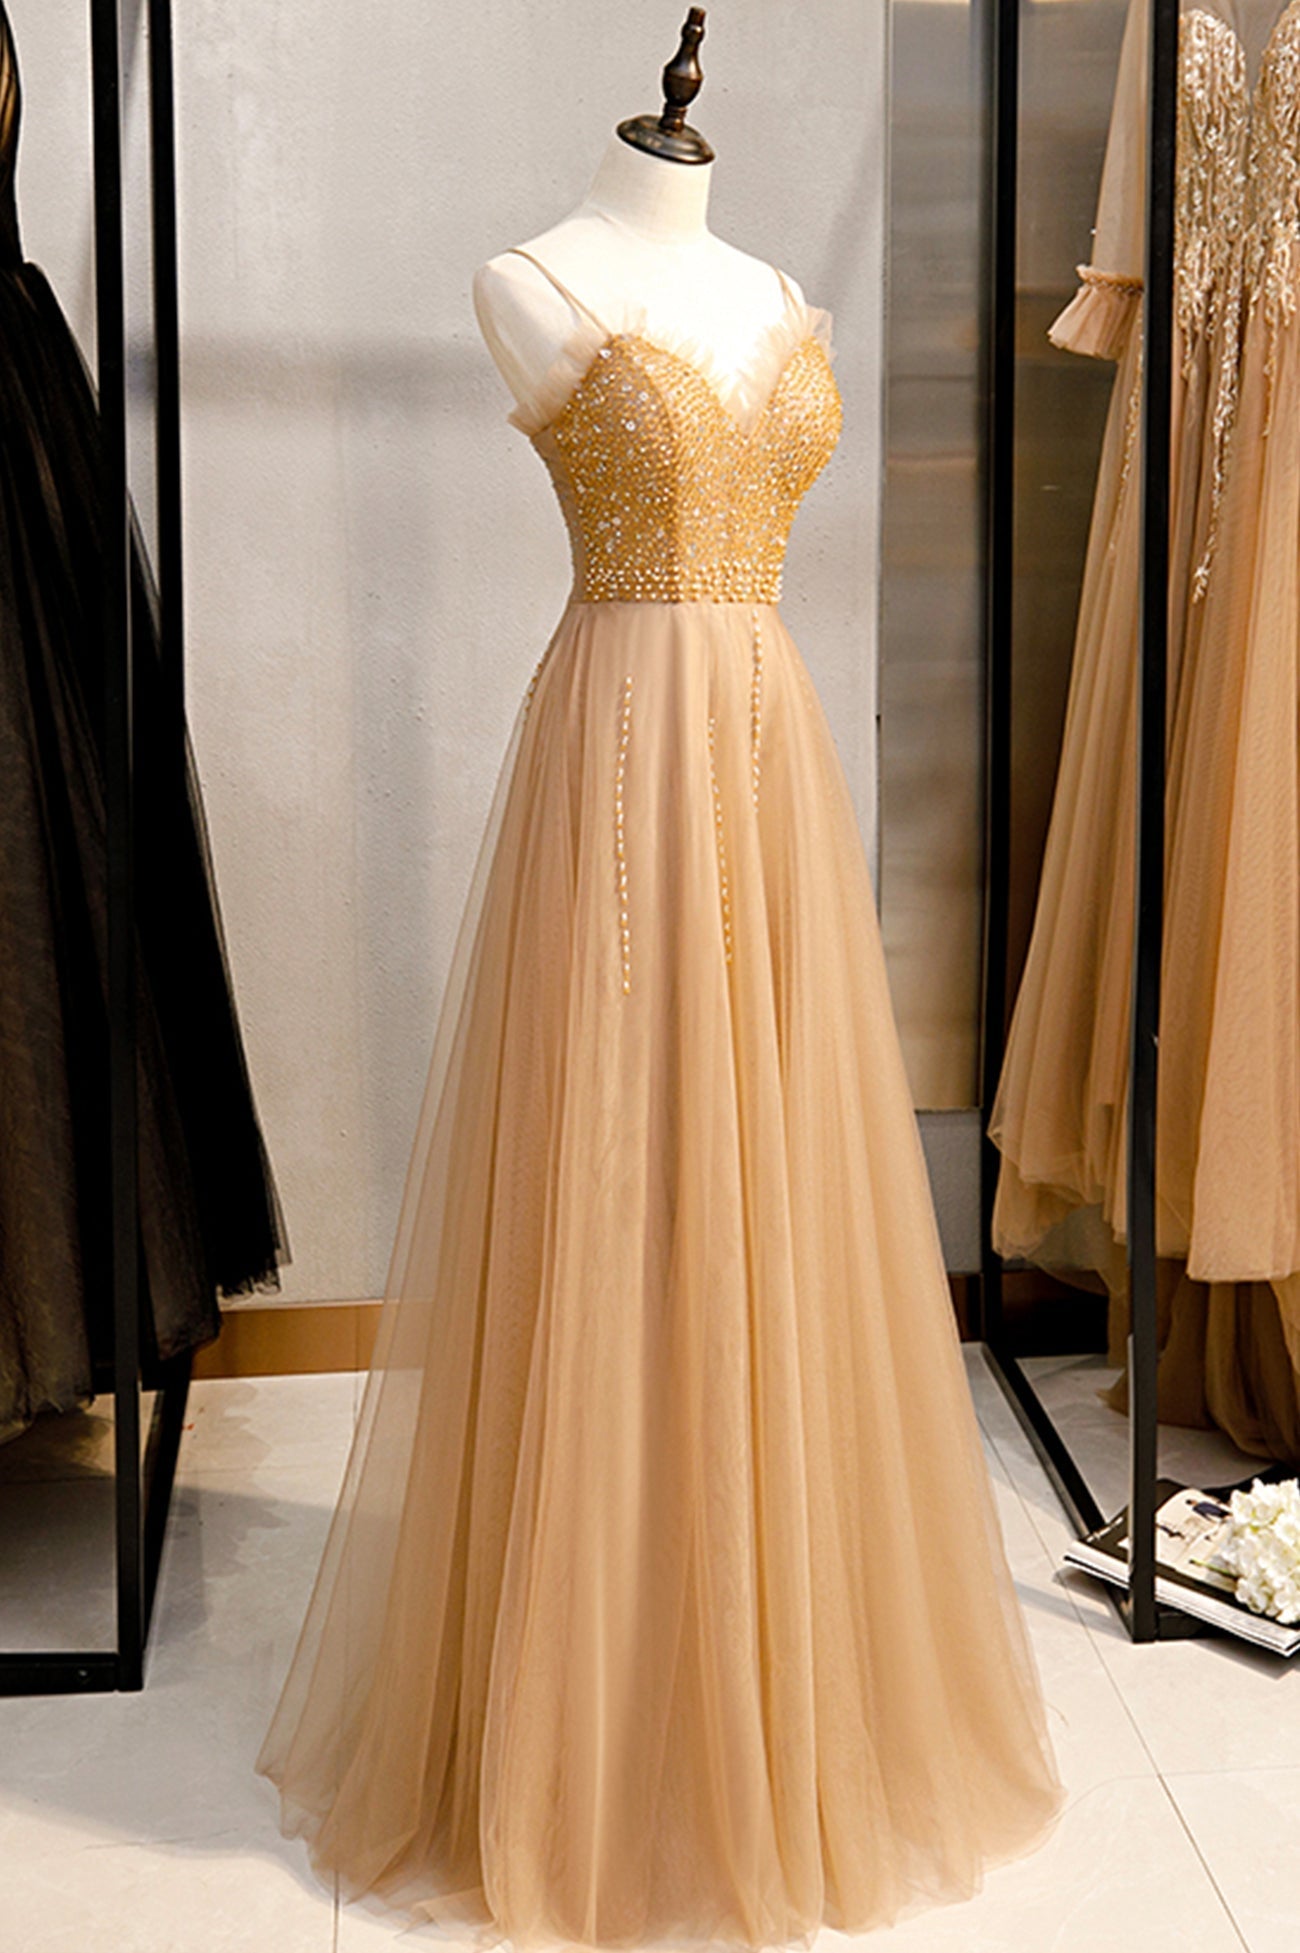 Prom Shoes, A-Line Spaghetti Straps Tulle Beaded Long Prom Dress, Evening Party Dress